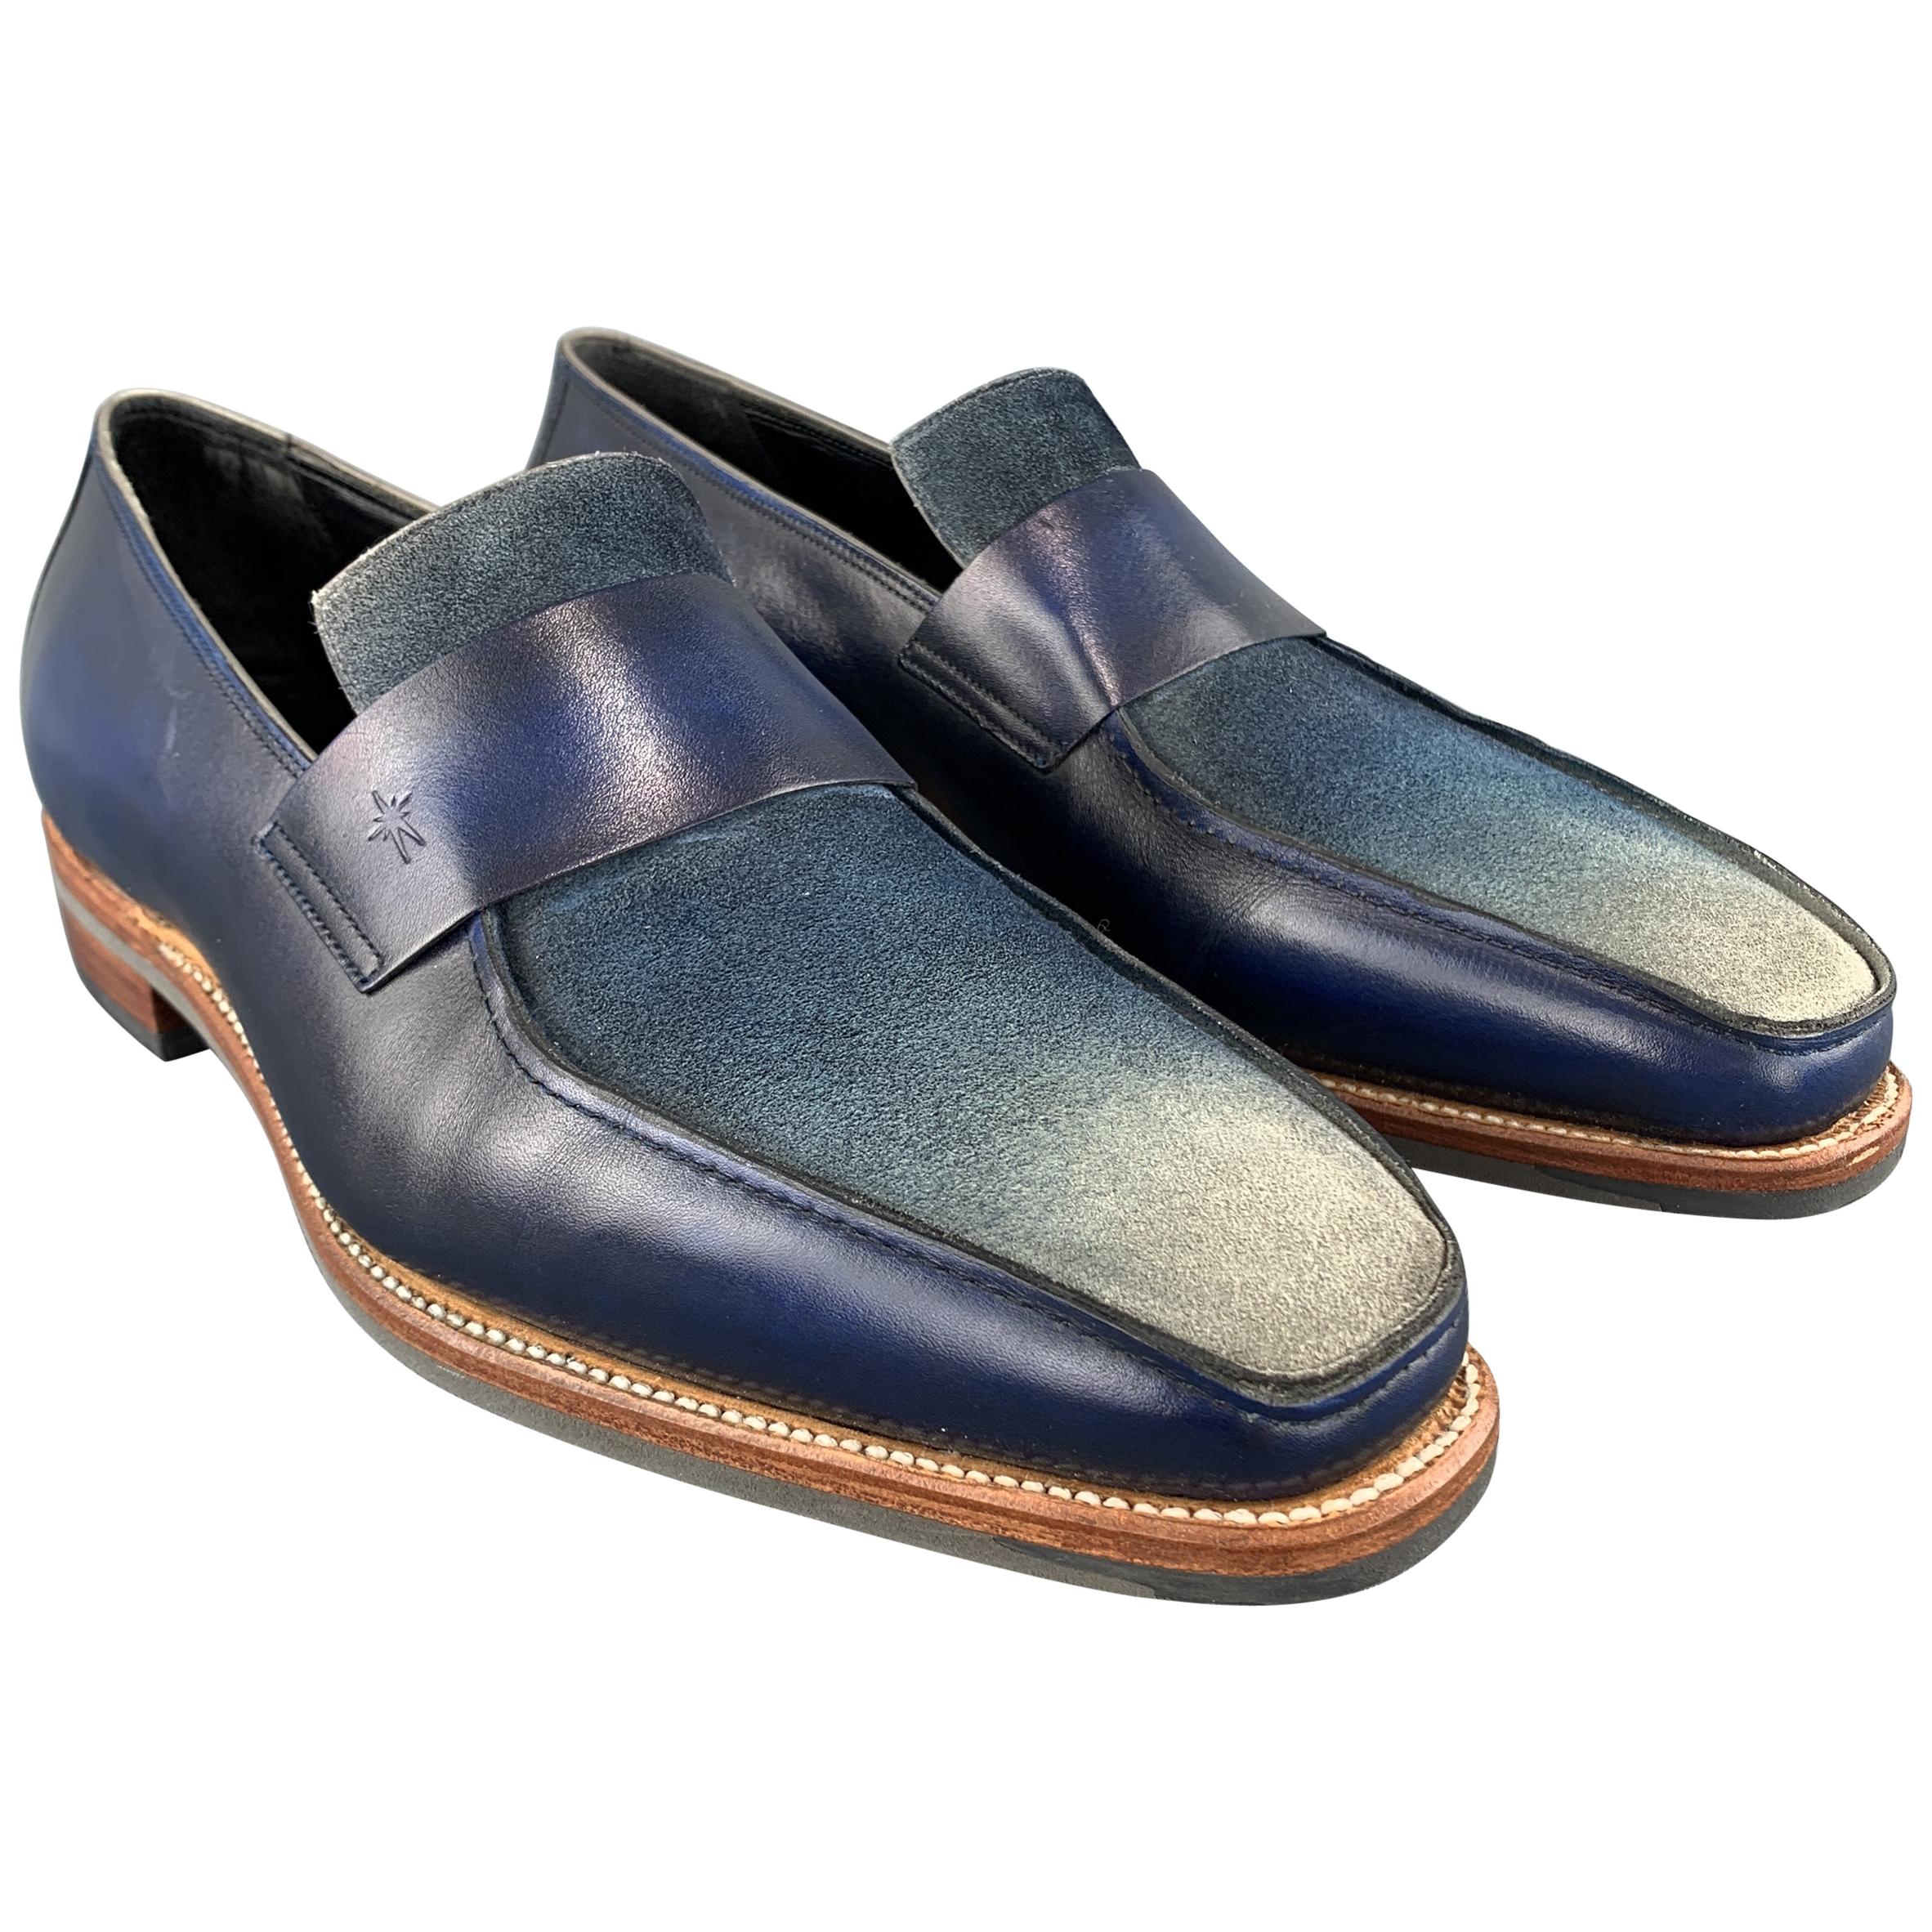 CORTHAY loafers come in blue leather with an ombre suede panel. Made in France.

Brand New With Shoe Trees & Box.
Marked: UK 9.5

Outsole: 11.75 x 4 in.